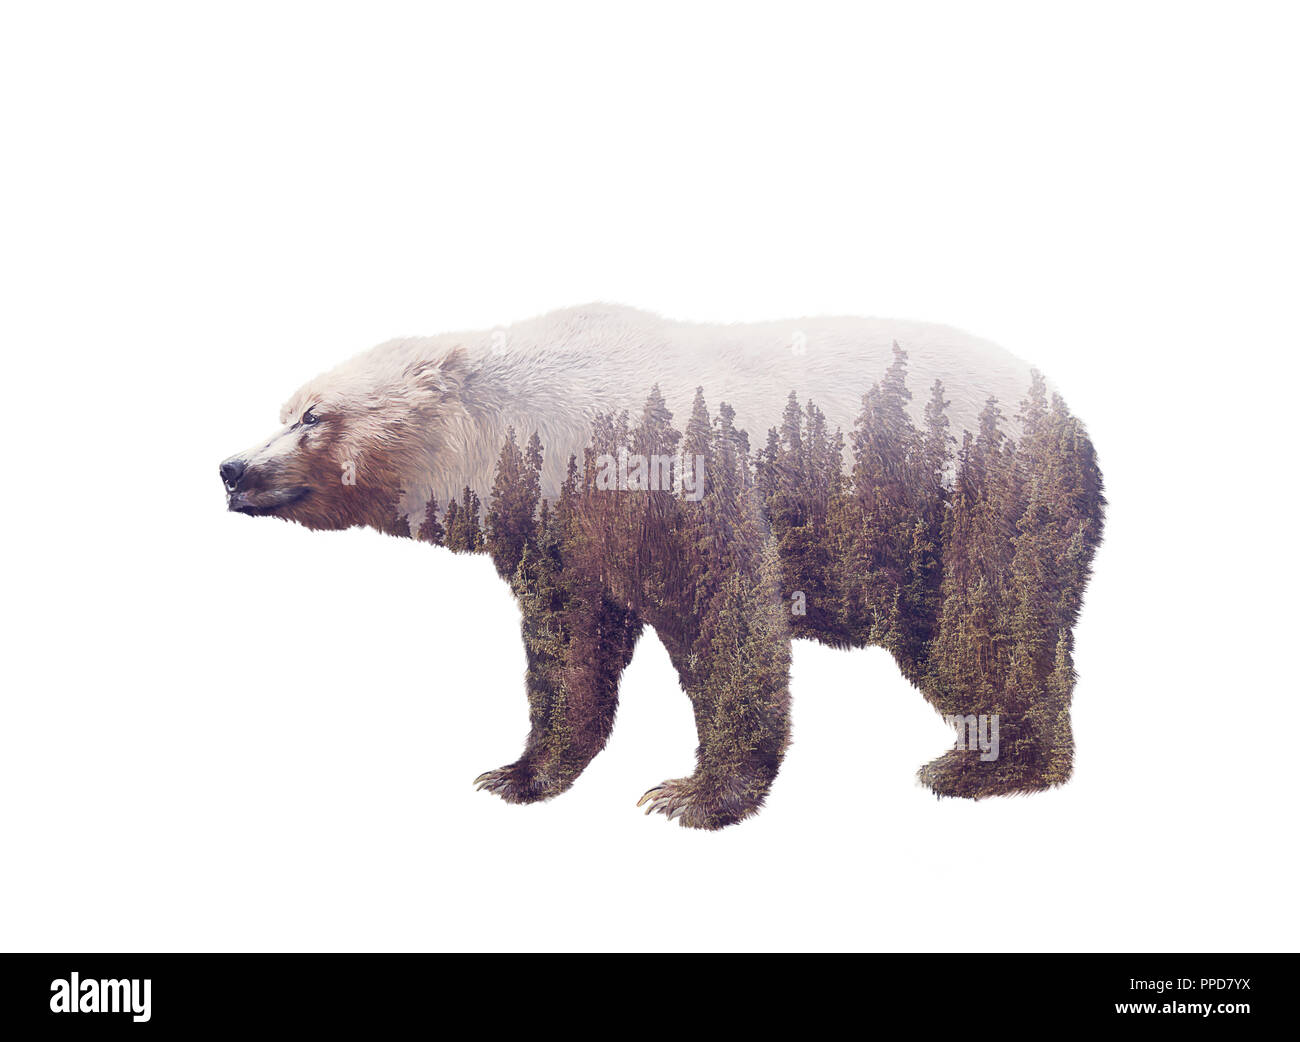 https://c8.alamy.com/comp/PPD7YX/double-exposure-of-a-wild-brown-bear-and-a-pine-forest-isolated-on-white-background-PPD7YX.jpg